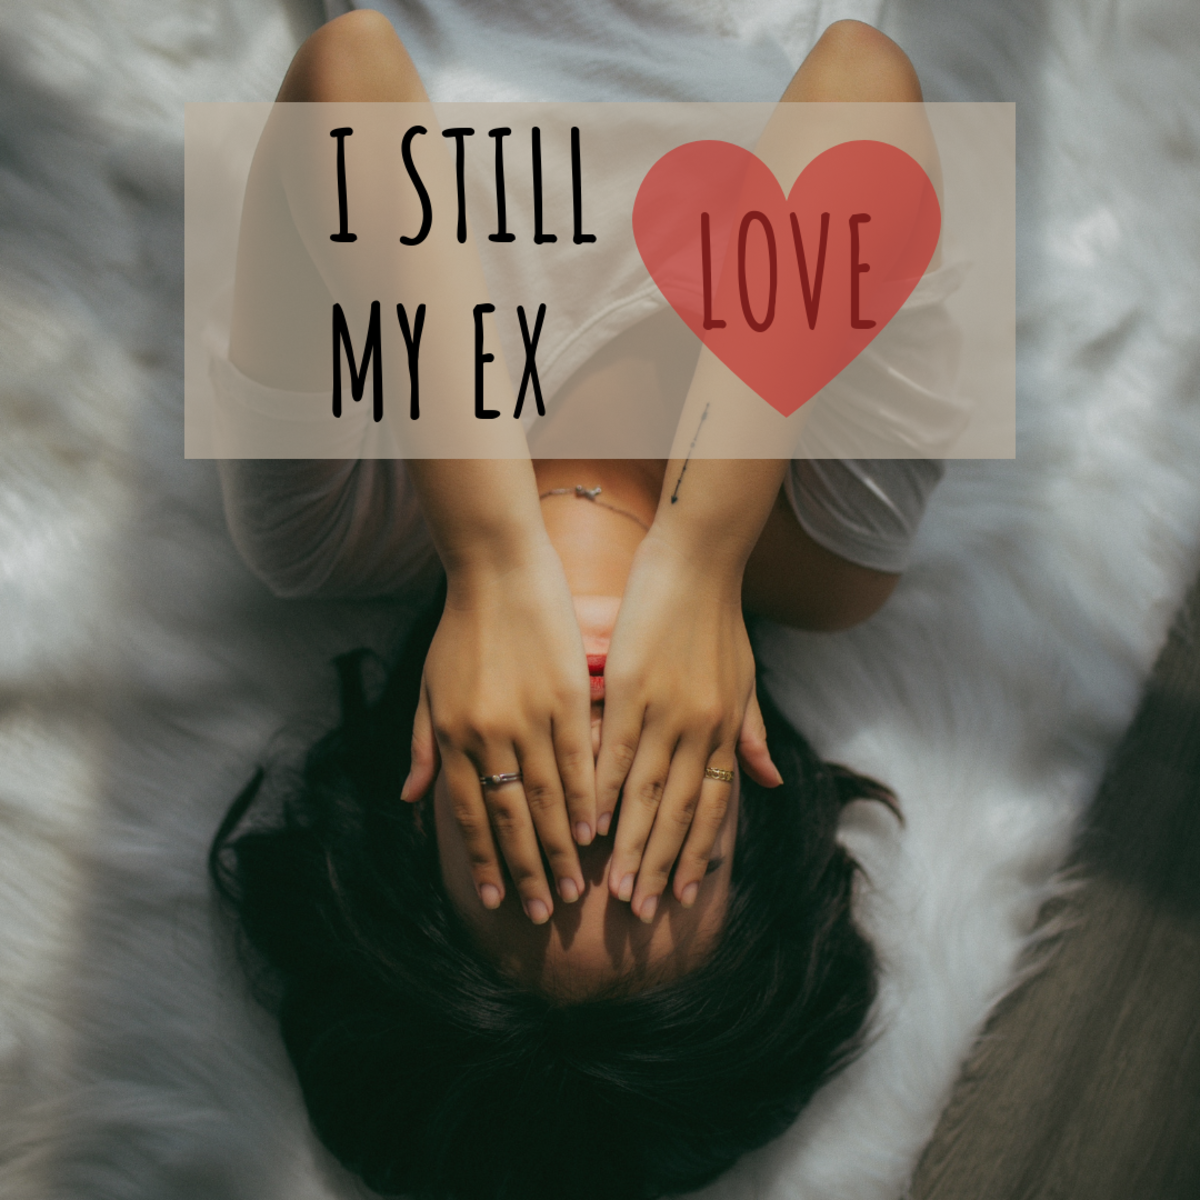 Why Am I Still in Love With My Ex?